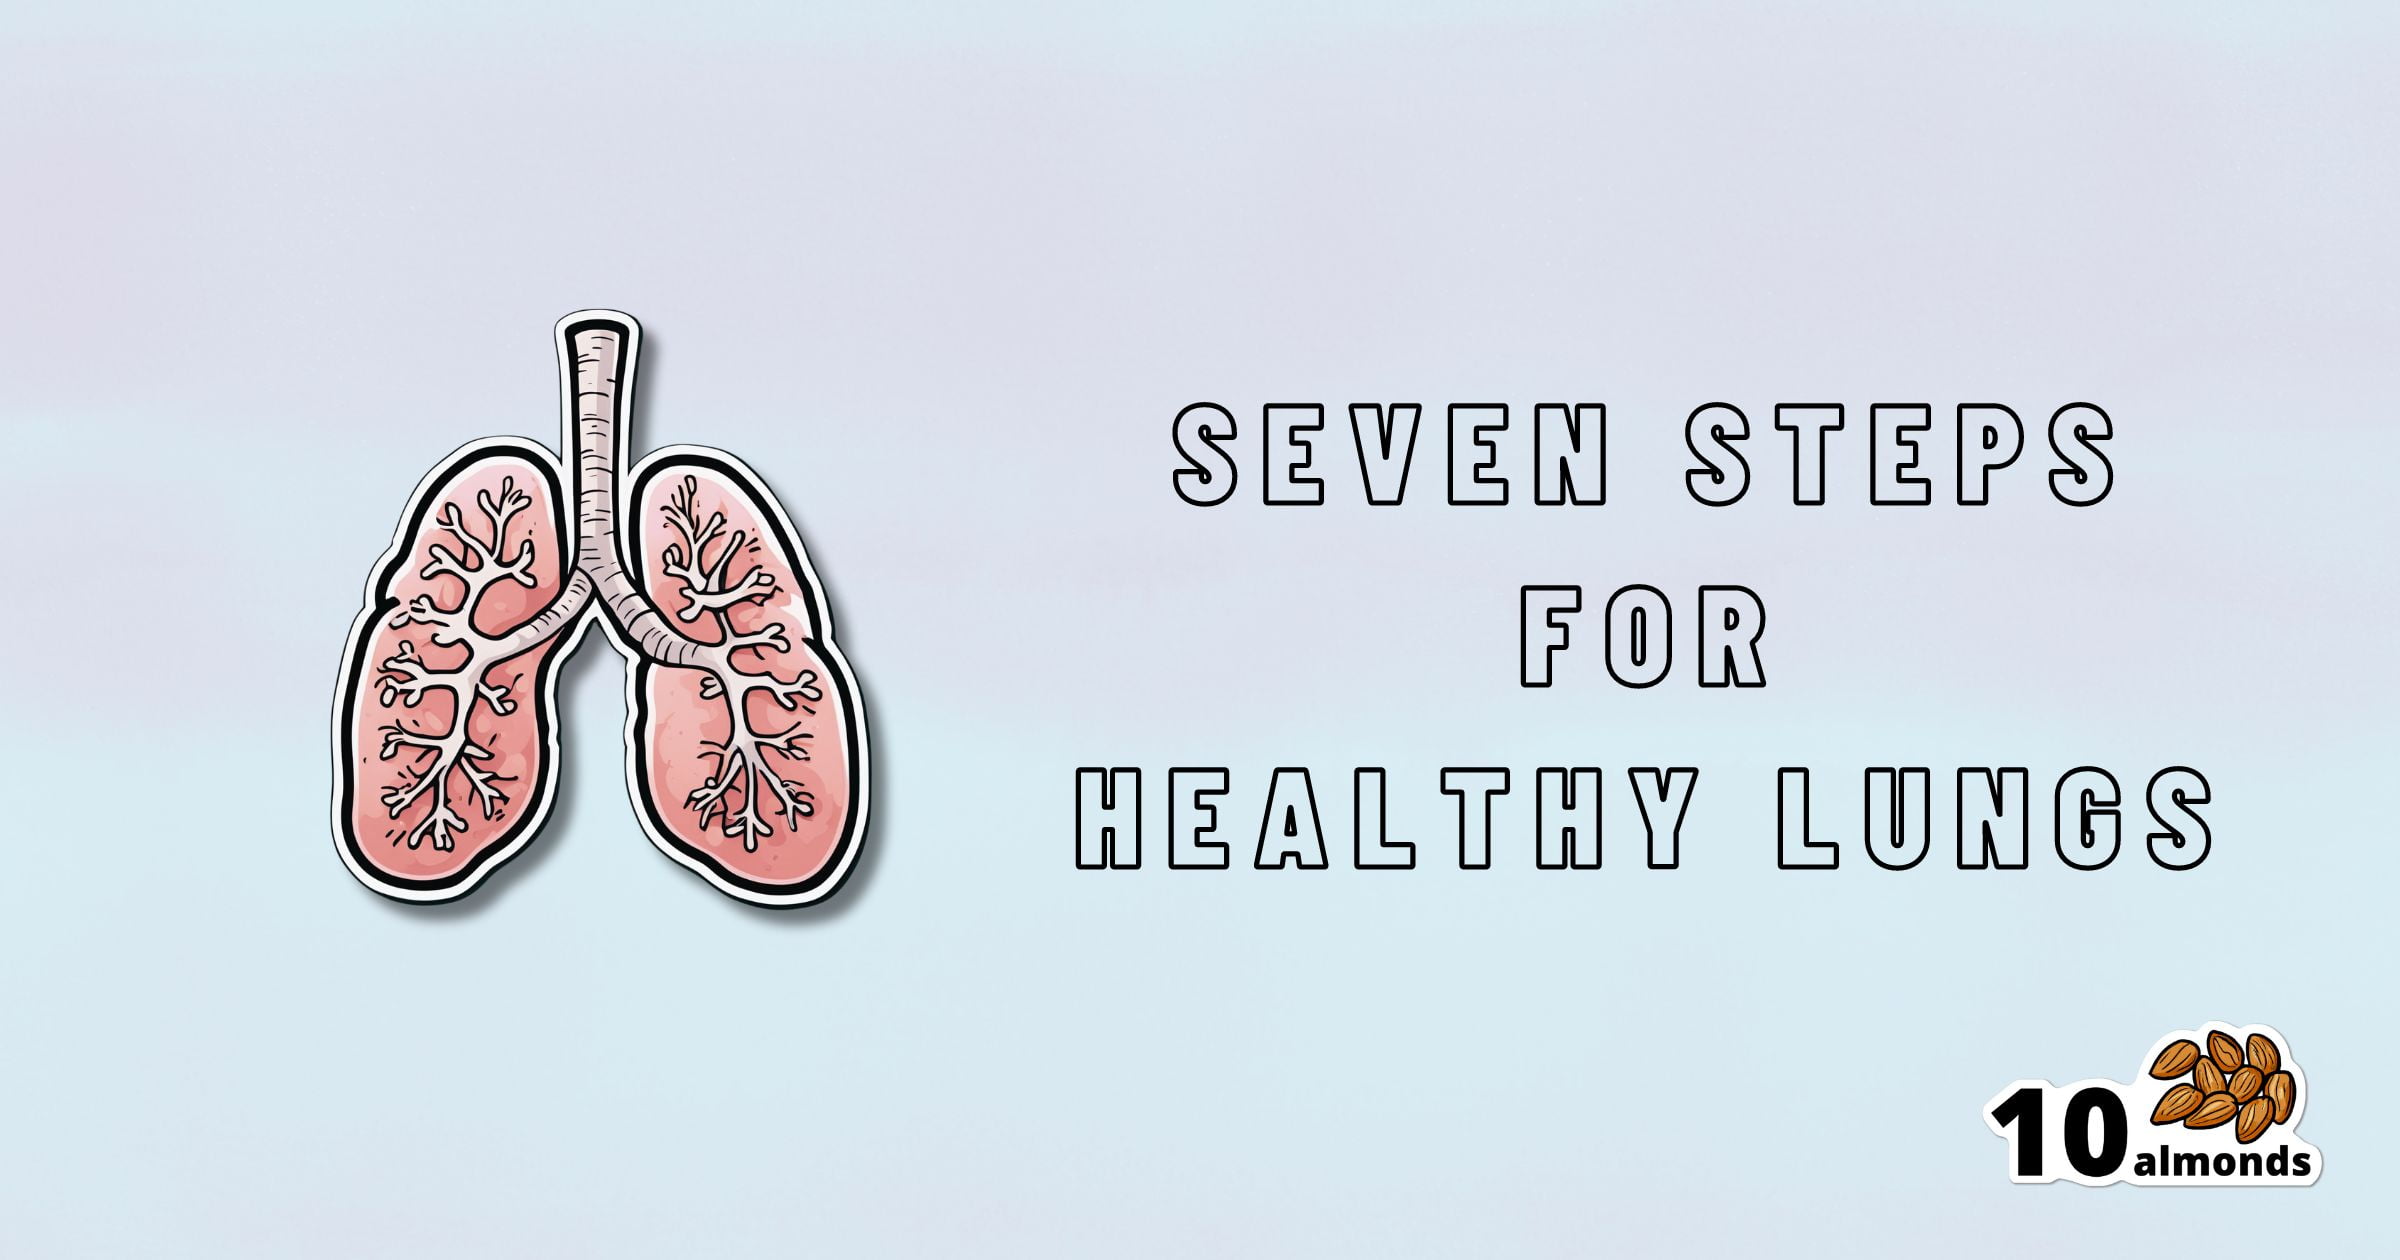 An illustration of lungs is shown on the left side of the image. To the right, the text reads "SEVEN STEPS FOR GOOD LUNG HEALTH" in all capital letters. At the bottom right corner, there is an icon of almonds with the text "10 almonds" next to it.